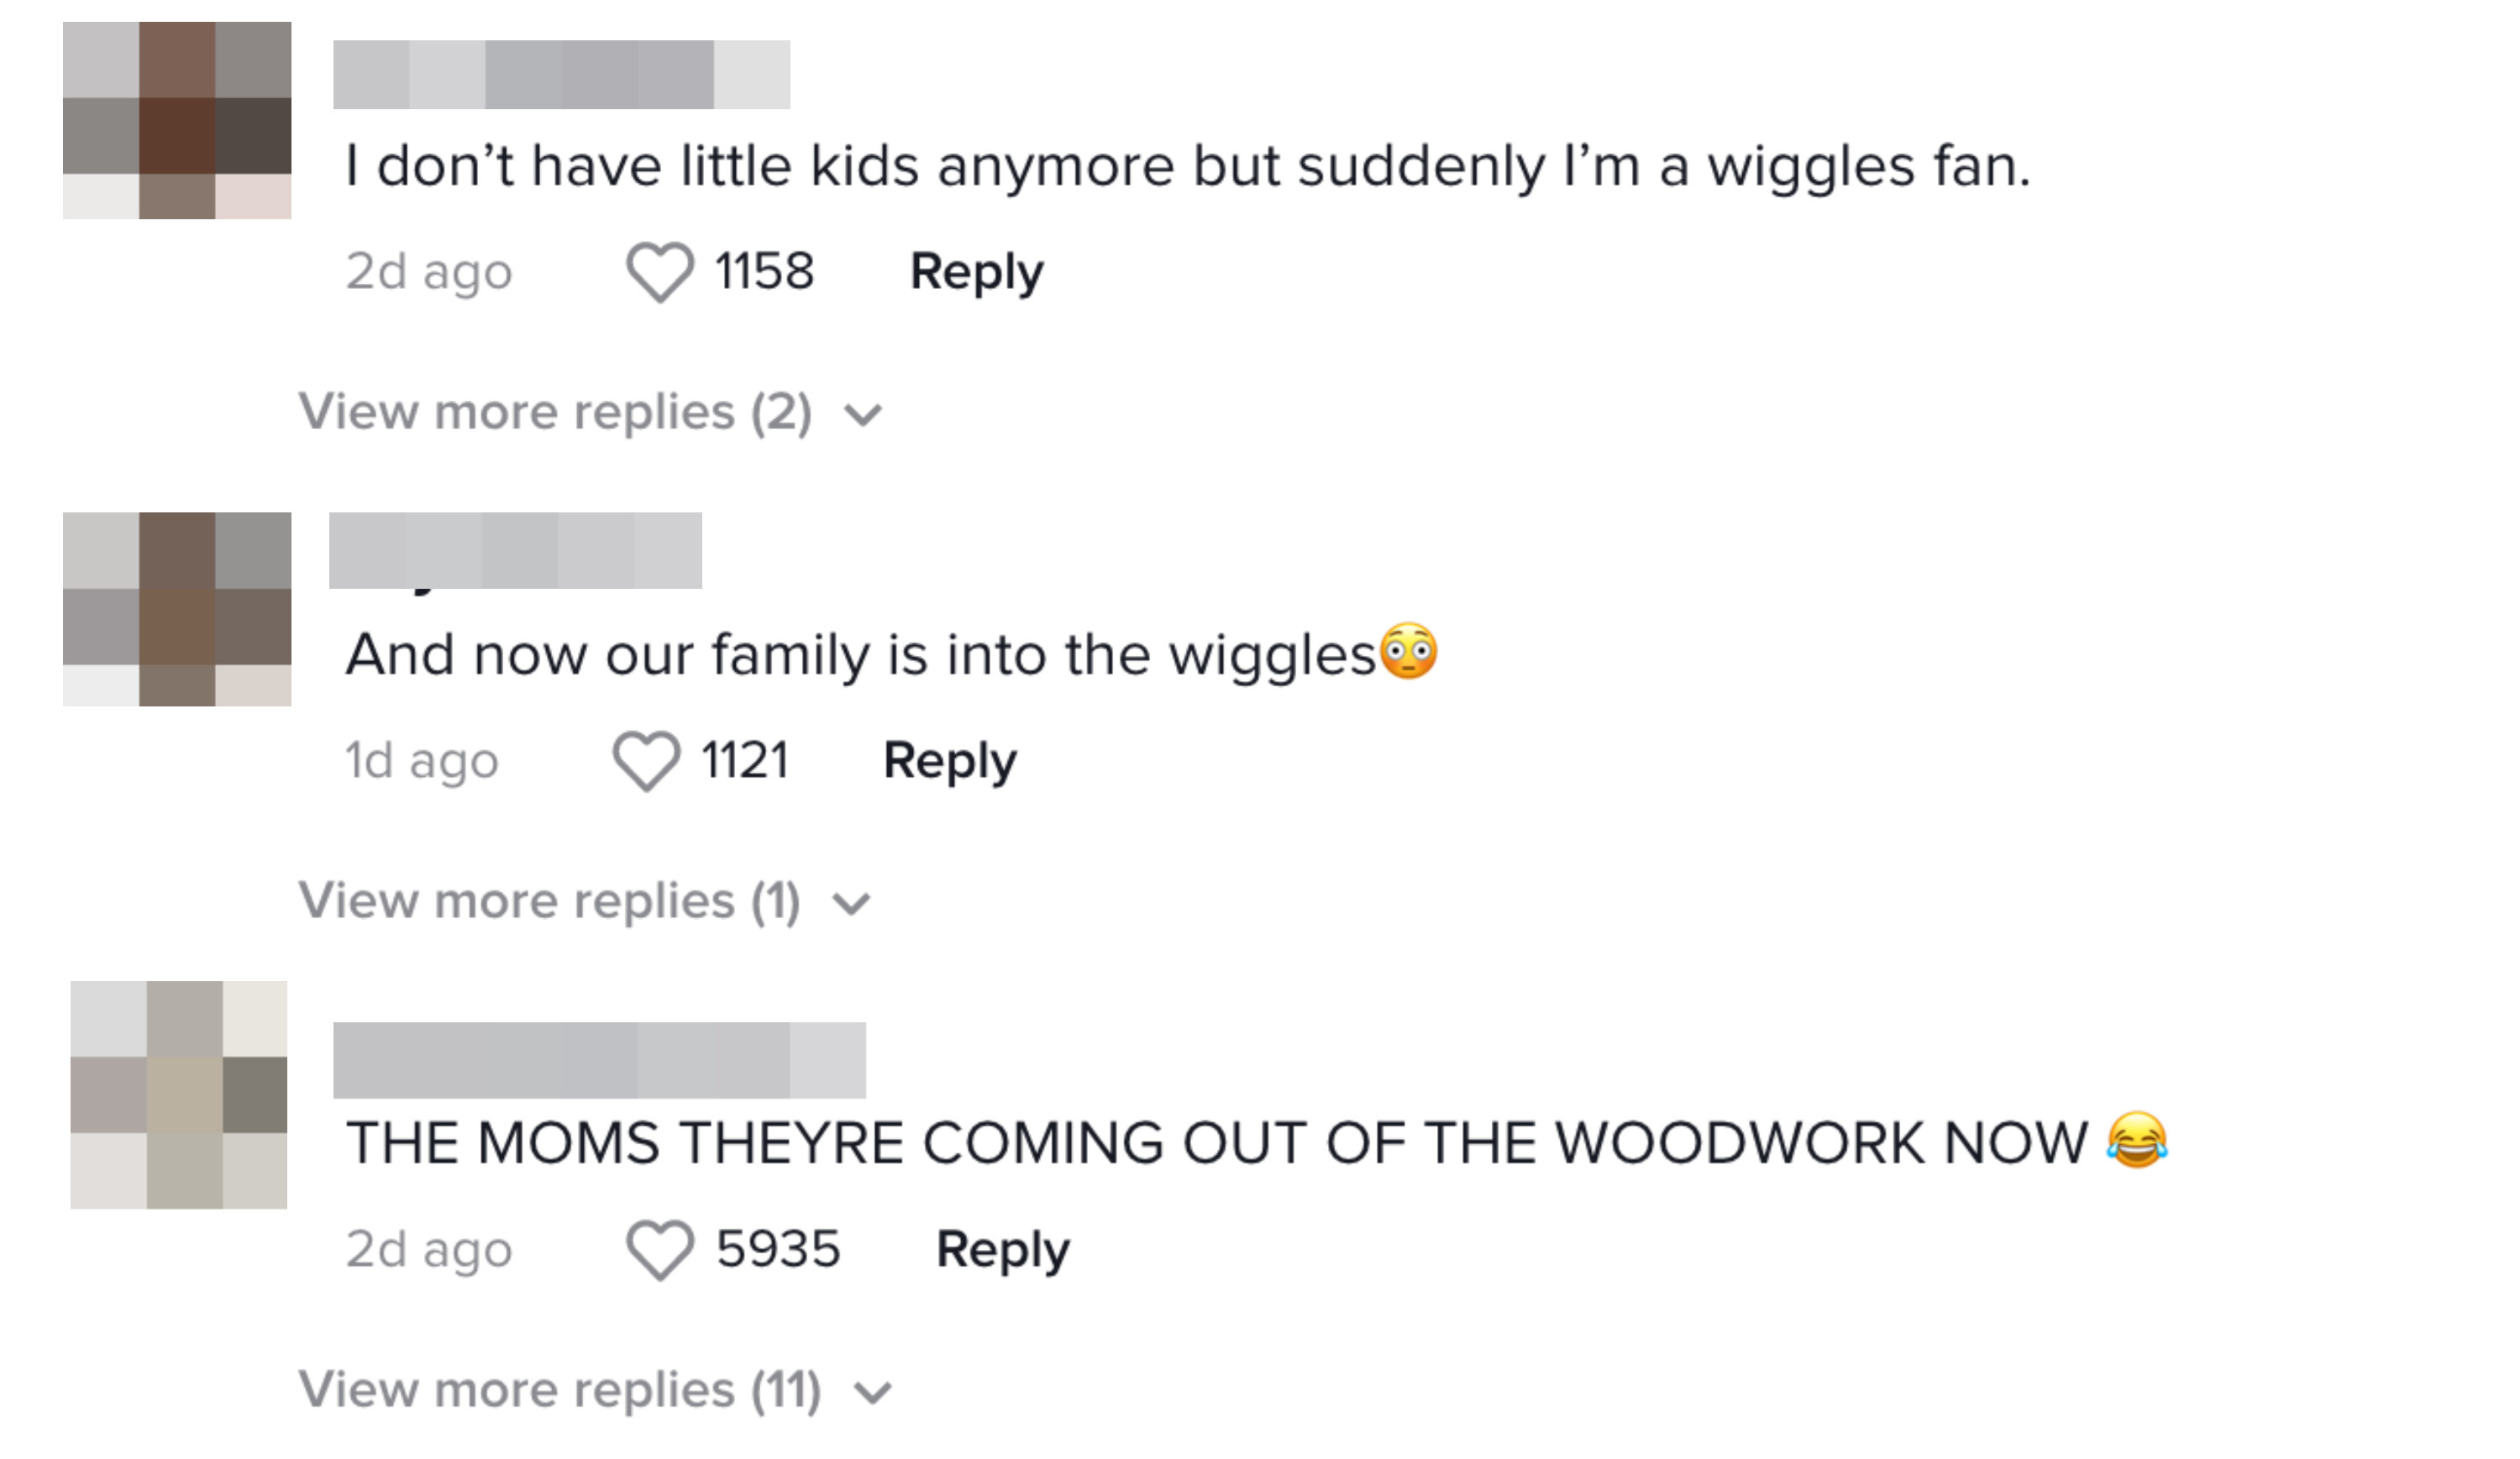 One person commented, &quot;I don&#x27;t have little kids anymore but suddenly I&#x27;m a Wiggles fan&quot; while another said, &quot;THE MOMS THEY&#x27;RE COMING OUT OF THE WOODWORK NOW [laughing, crying emoji]